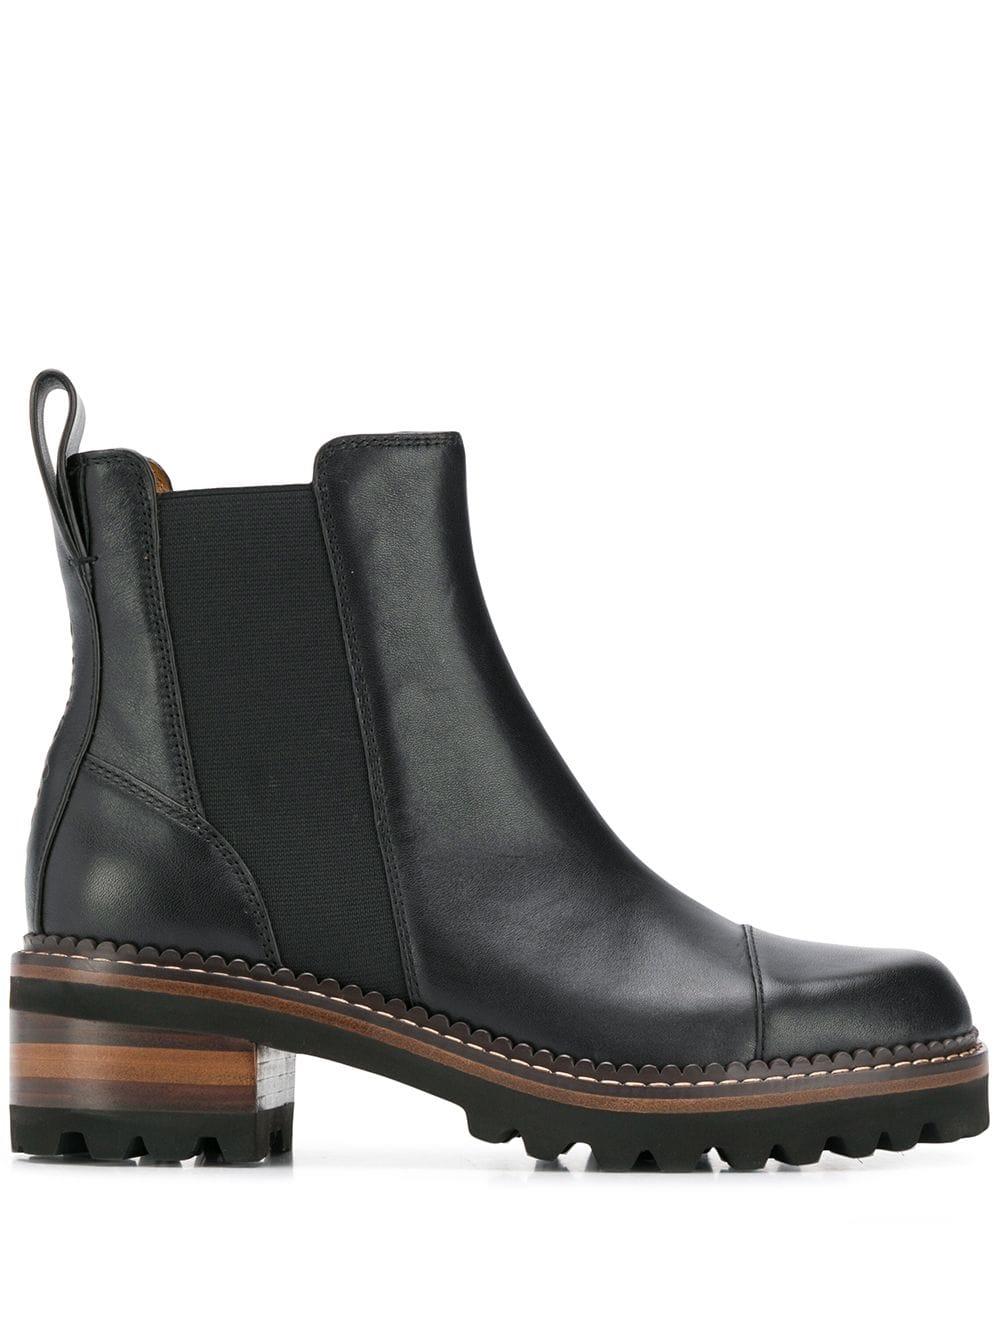 See By Chloé Leather Chelsea Platform Boots in Black - Save 28% - Lyst